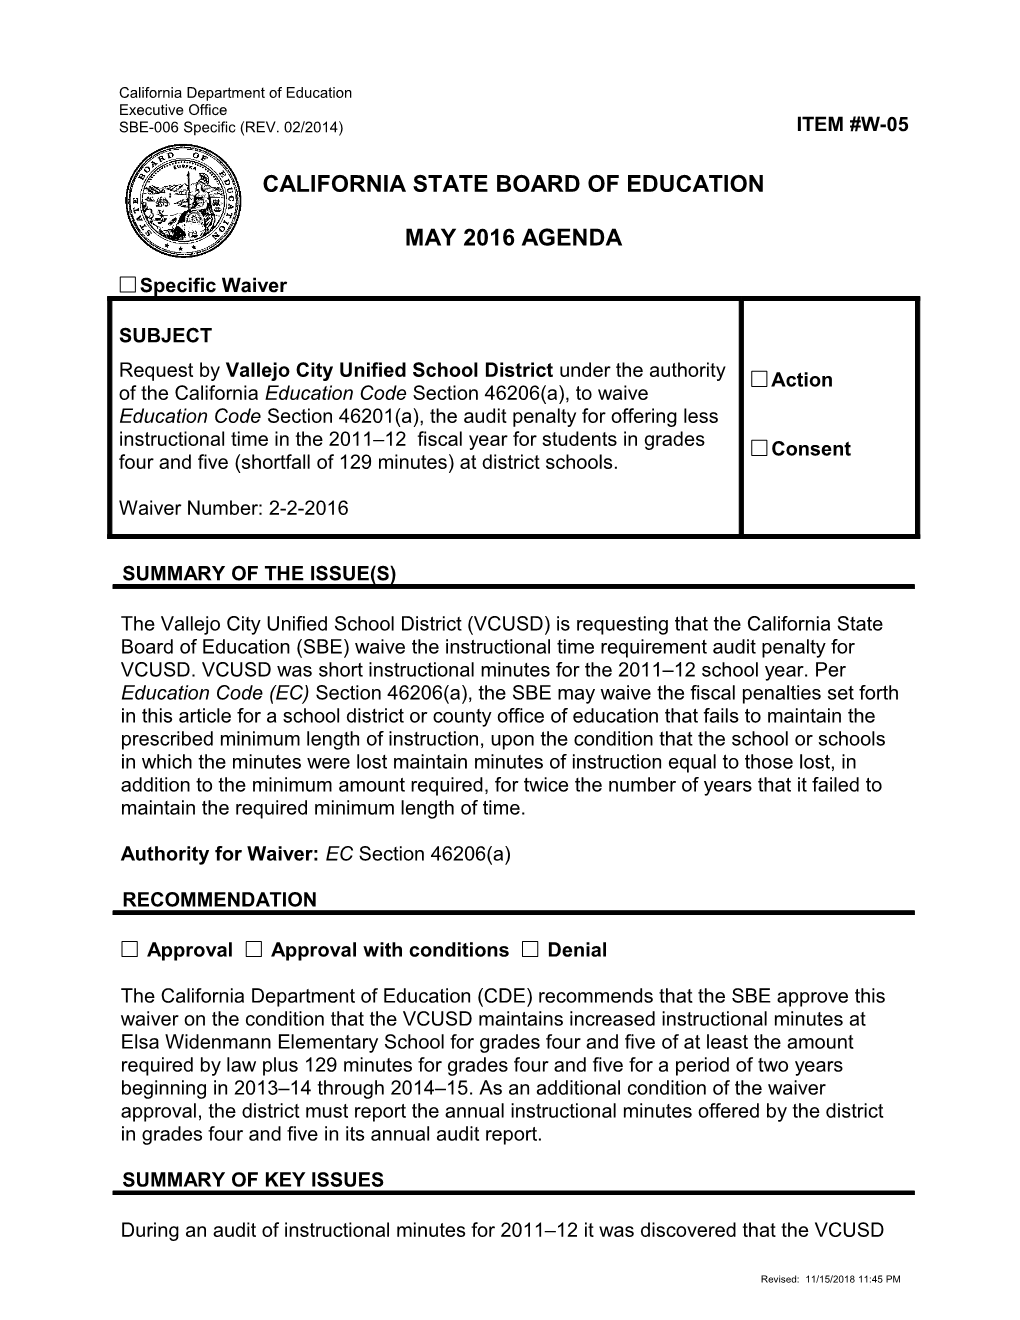 May 2016 Waiver Item W-05 - Meeting Agendas (CA State Board of Education)